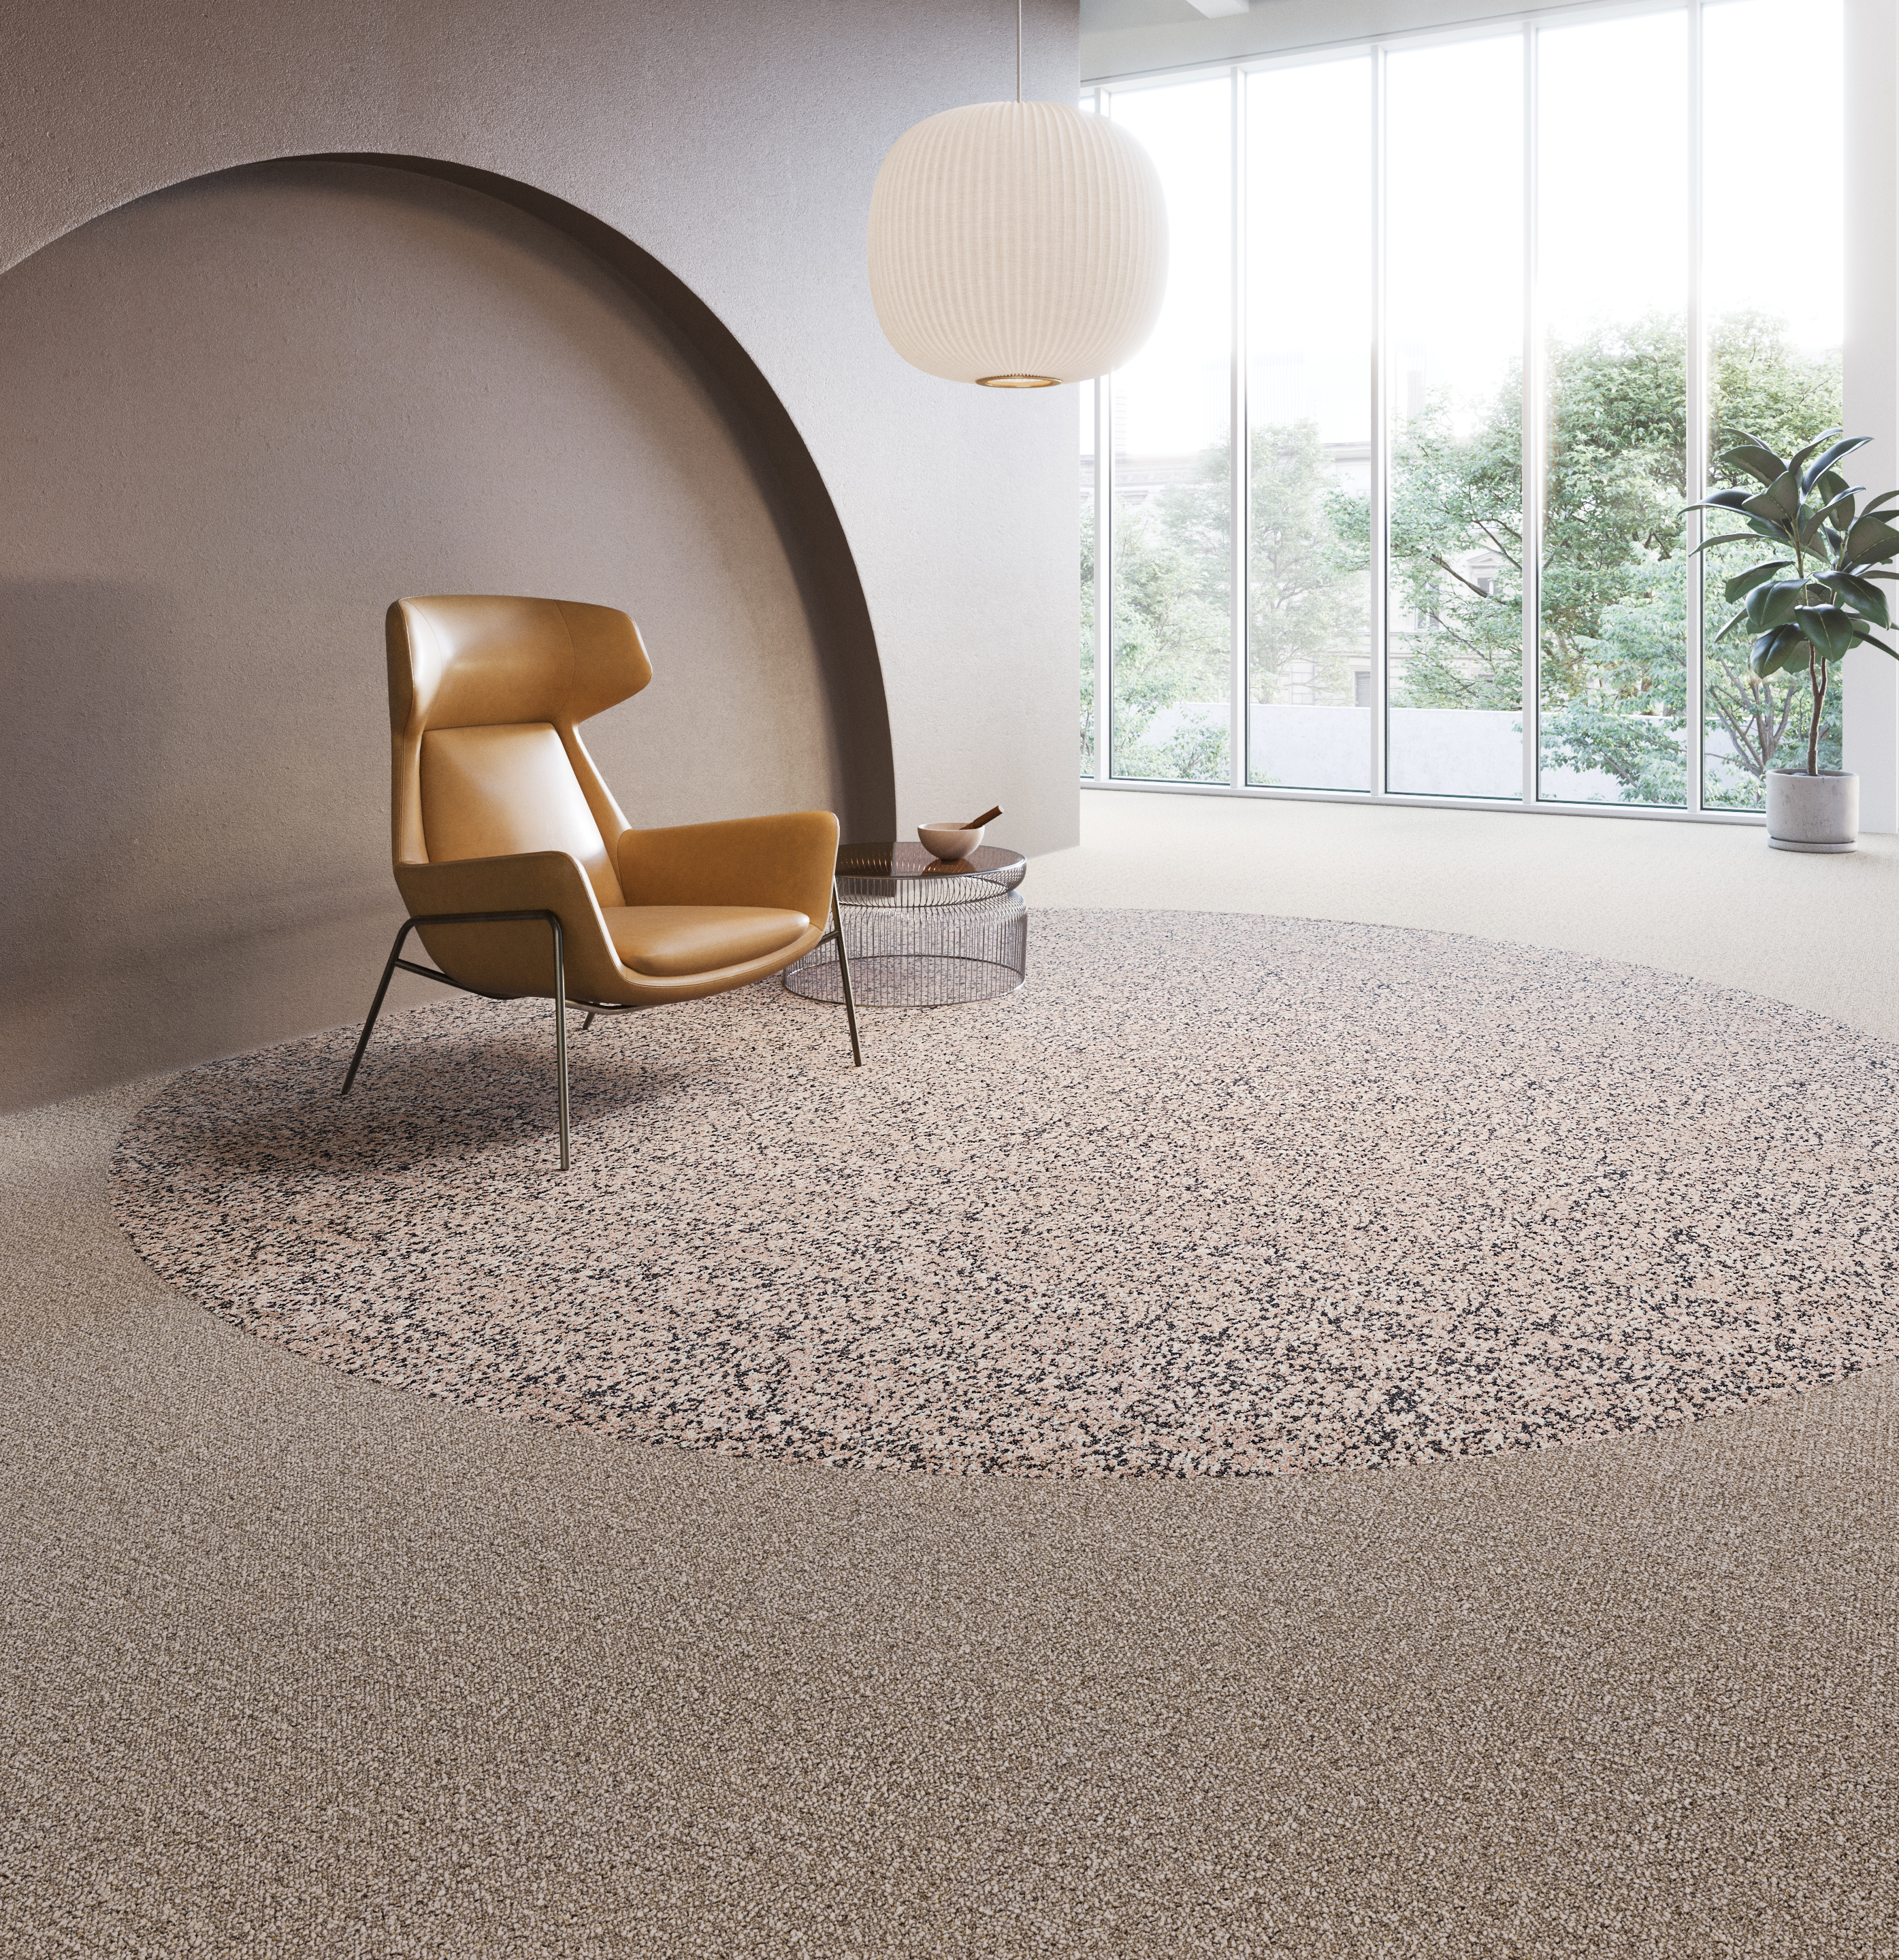 The Need for Sound is a new modular carpet collection inspired by the transformative power of sound that offers an innovative grouping of textures and colors. 